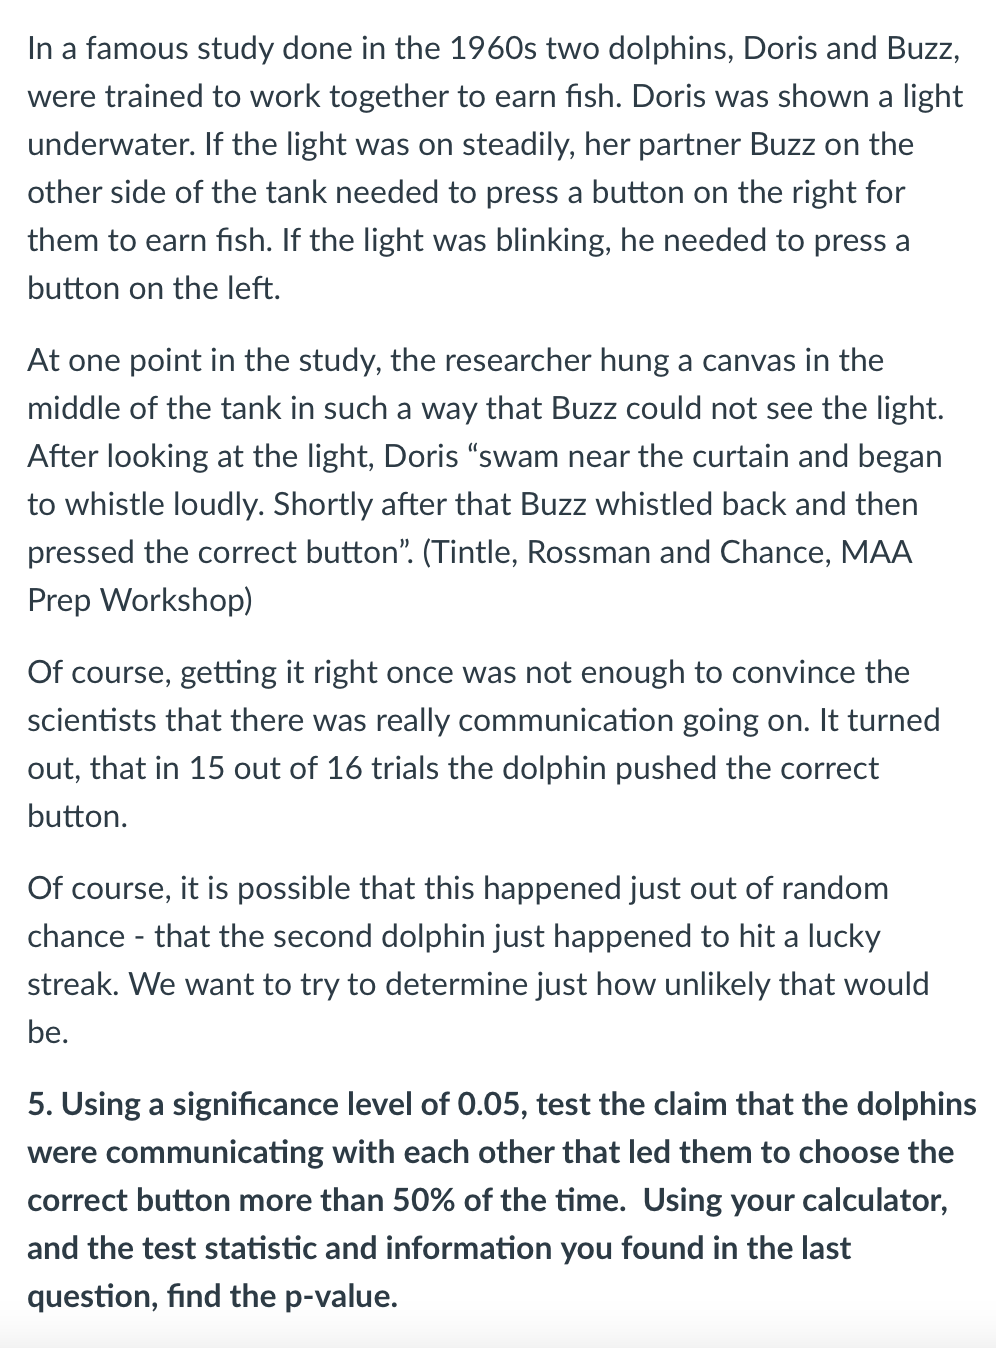 In a famous study done in the 1960s two dolphins, Doris and Buzz,
were trained to work together to earn fish. Doris was shown a light
underwater. If the light was on steadily, her partner Buzz on the
other side of the tank needed to press a button on the right for
them to earn fish. If the light was blinking, he needed to press a
button on the left.
At one point in the study, the researcher hung a canvas in the
middle of the tank in such a way that Buzz could not see the light.
After looking at the light, Doris "swam near the curtain and began
to whistle loudly. Shortly after that Buzz whistled back and then
pressed the correct button". (Tintle, Rossman and Chance, MAA
Prep Workshop)
Of course, getting it right once was not enough to convince the
scientists that there was really communication going on. It turned
out, that in 15 out of 16 trials the dolphin pushed the correct
button.
Of course, it is possible that this happened just out of random
chance - that the second dolphin just happened to hit a lucky
streak. We want to try to determine just how unlikely that would
be.
5. Using a significance level of 0.05, test the claim that the dolphins
were communicating with each other that led them to choose the
correct button more than 50% of the time. Using your calculator,
and the test statistic and information you found in the last
question, find the p-value.
